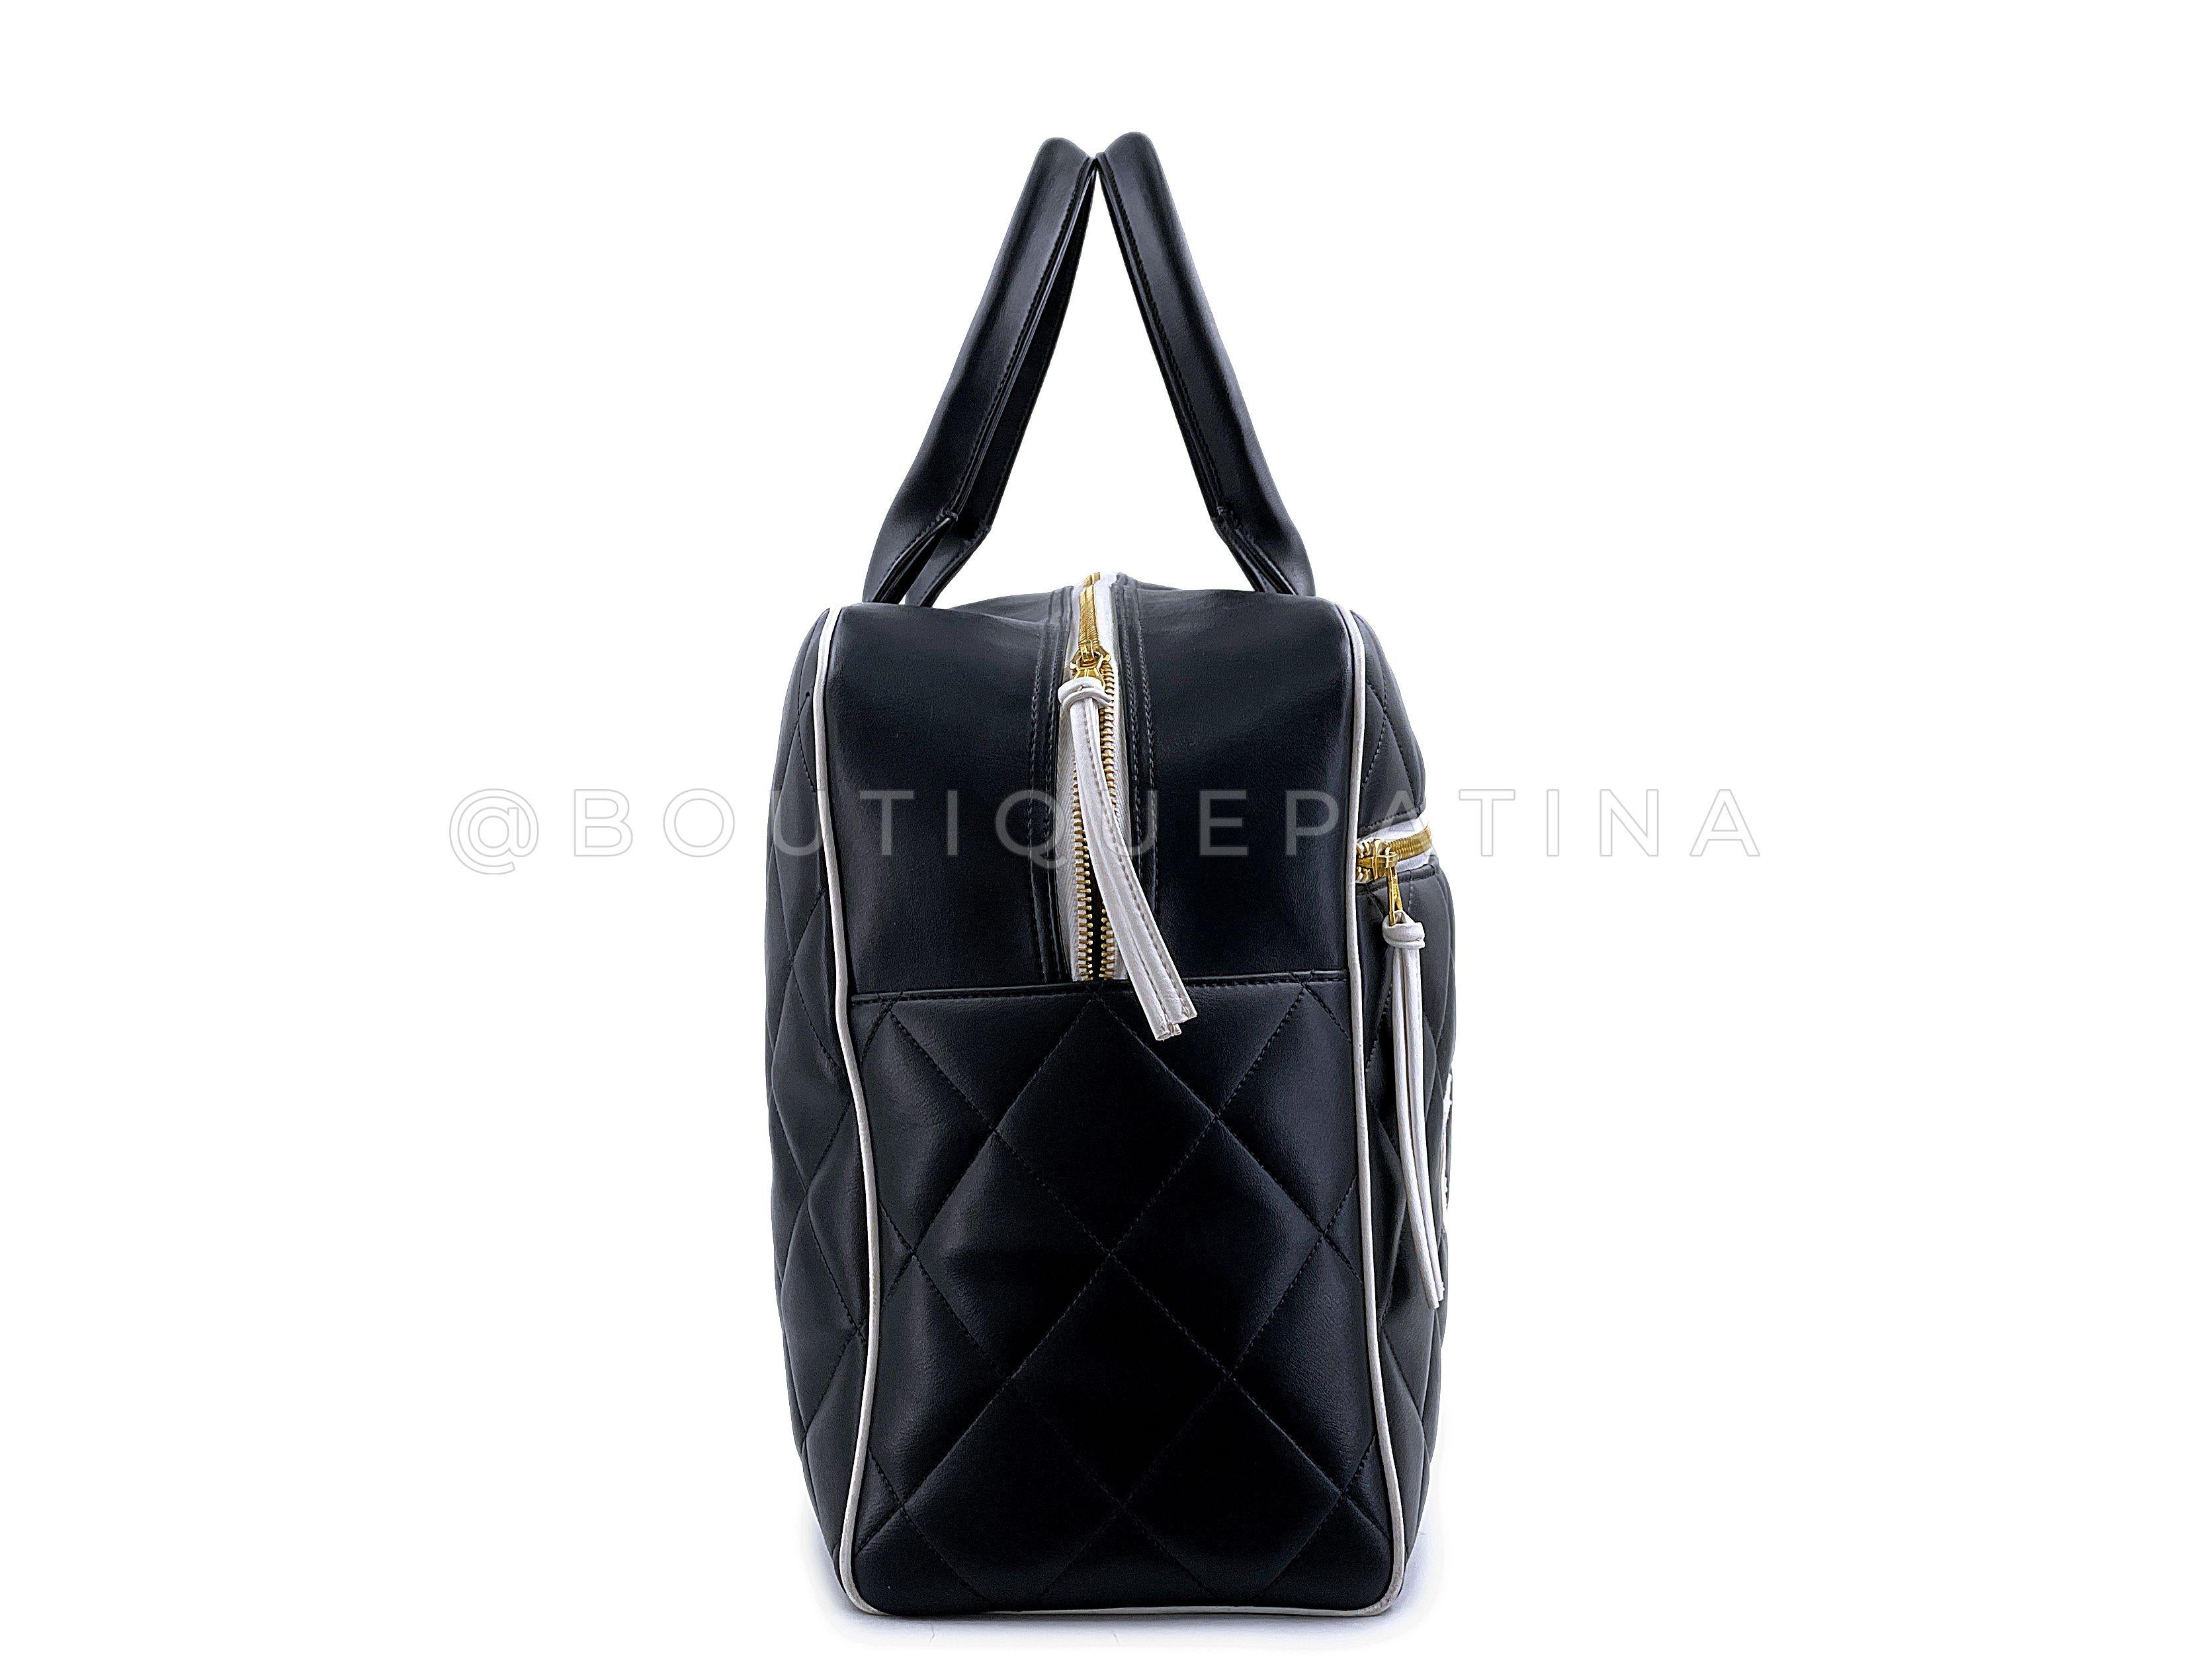 Pristine Chanel 1995 Vintage Black Letter Large Bowler Duffle Bag 67789 In Excellent Condition For Sale In Costa Mesa, CA